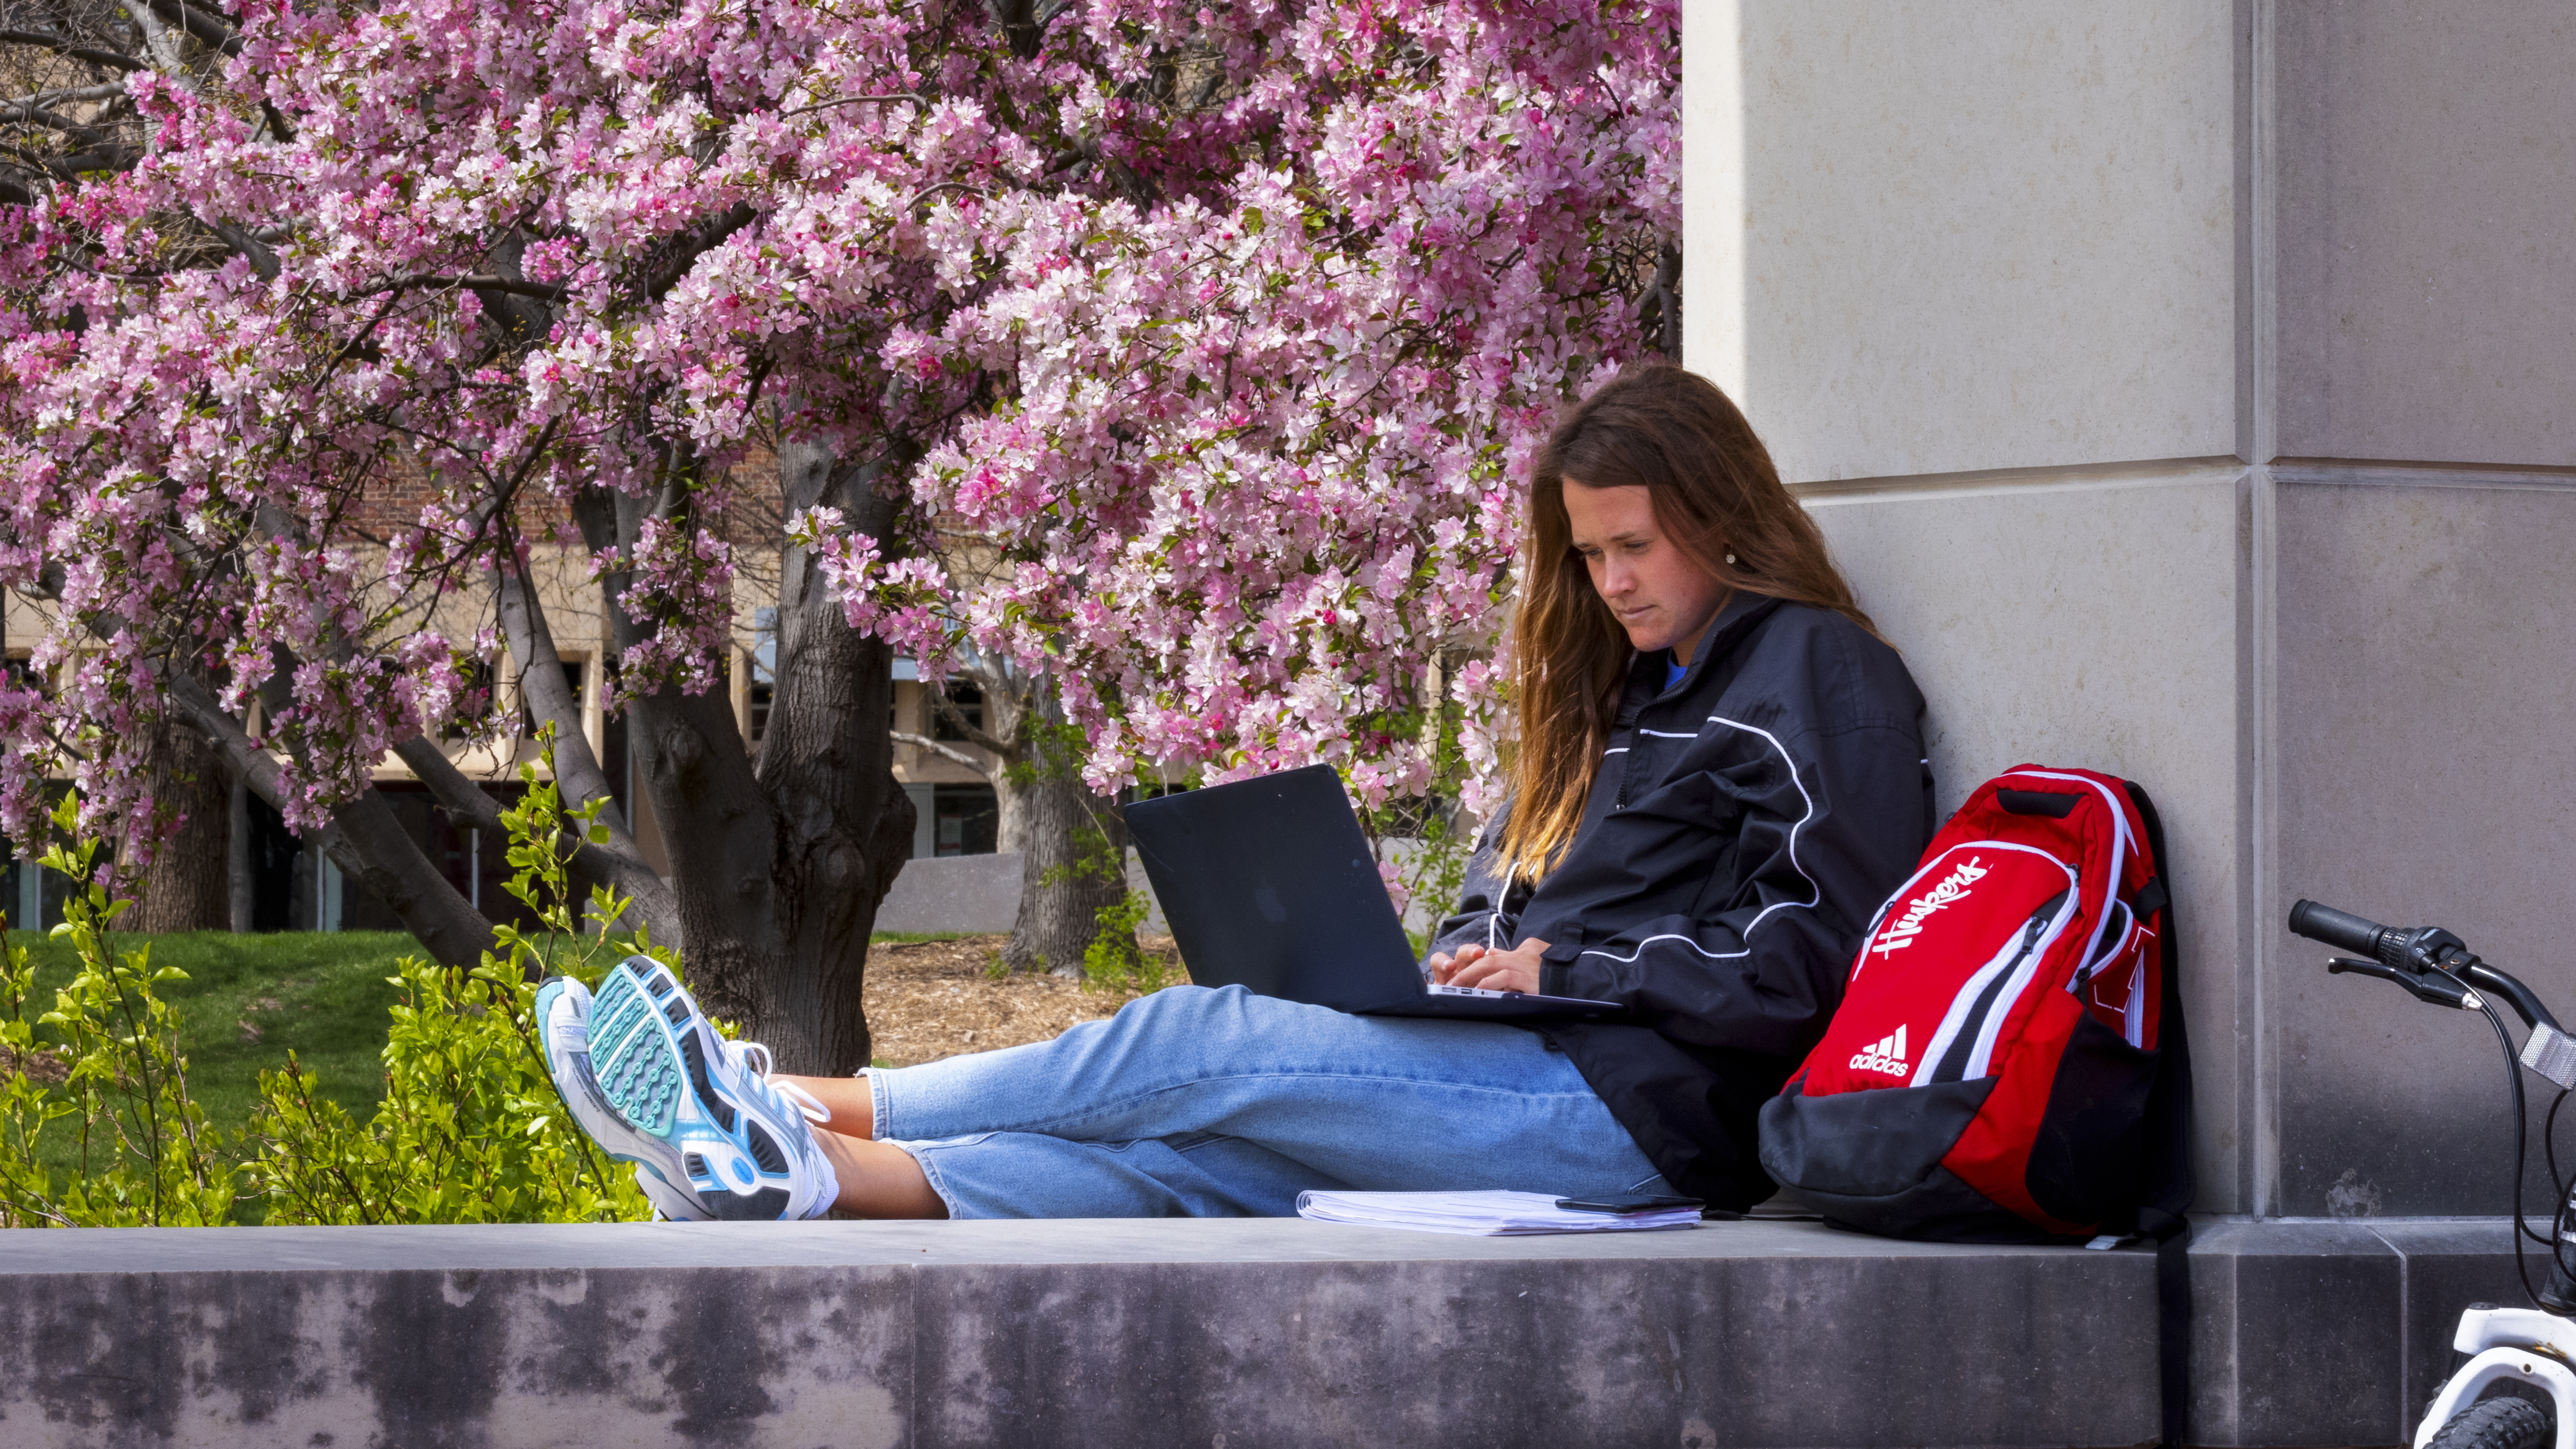 Students can find courses in MyRED by searching for "Pre-Session" in the session search field and add them to their shopping carts for priority registration, which begins Oct. 24.